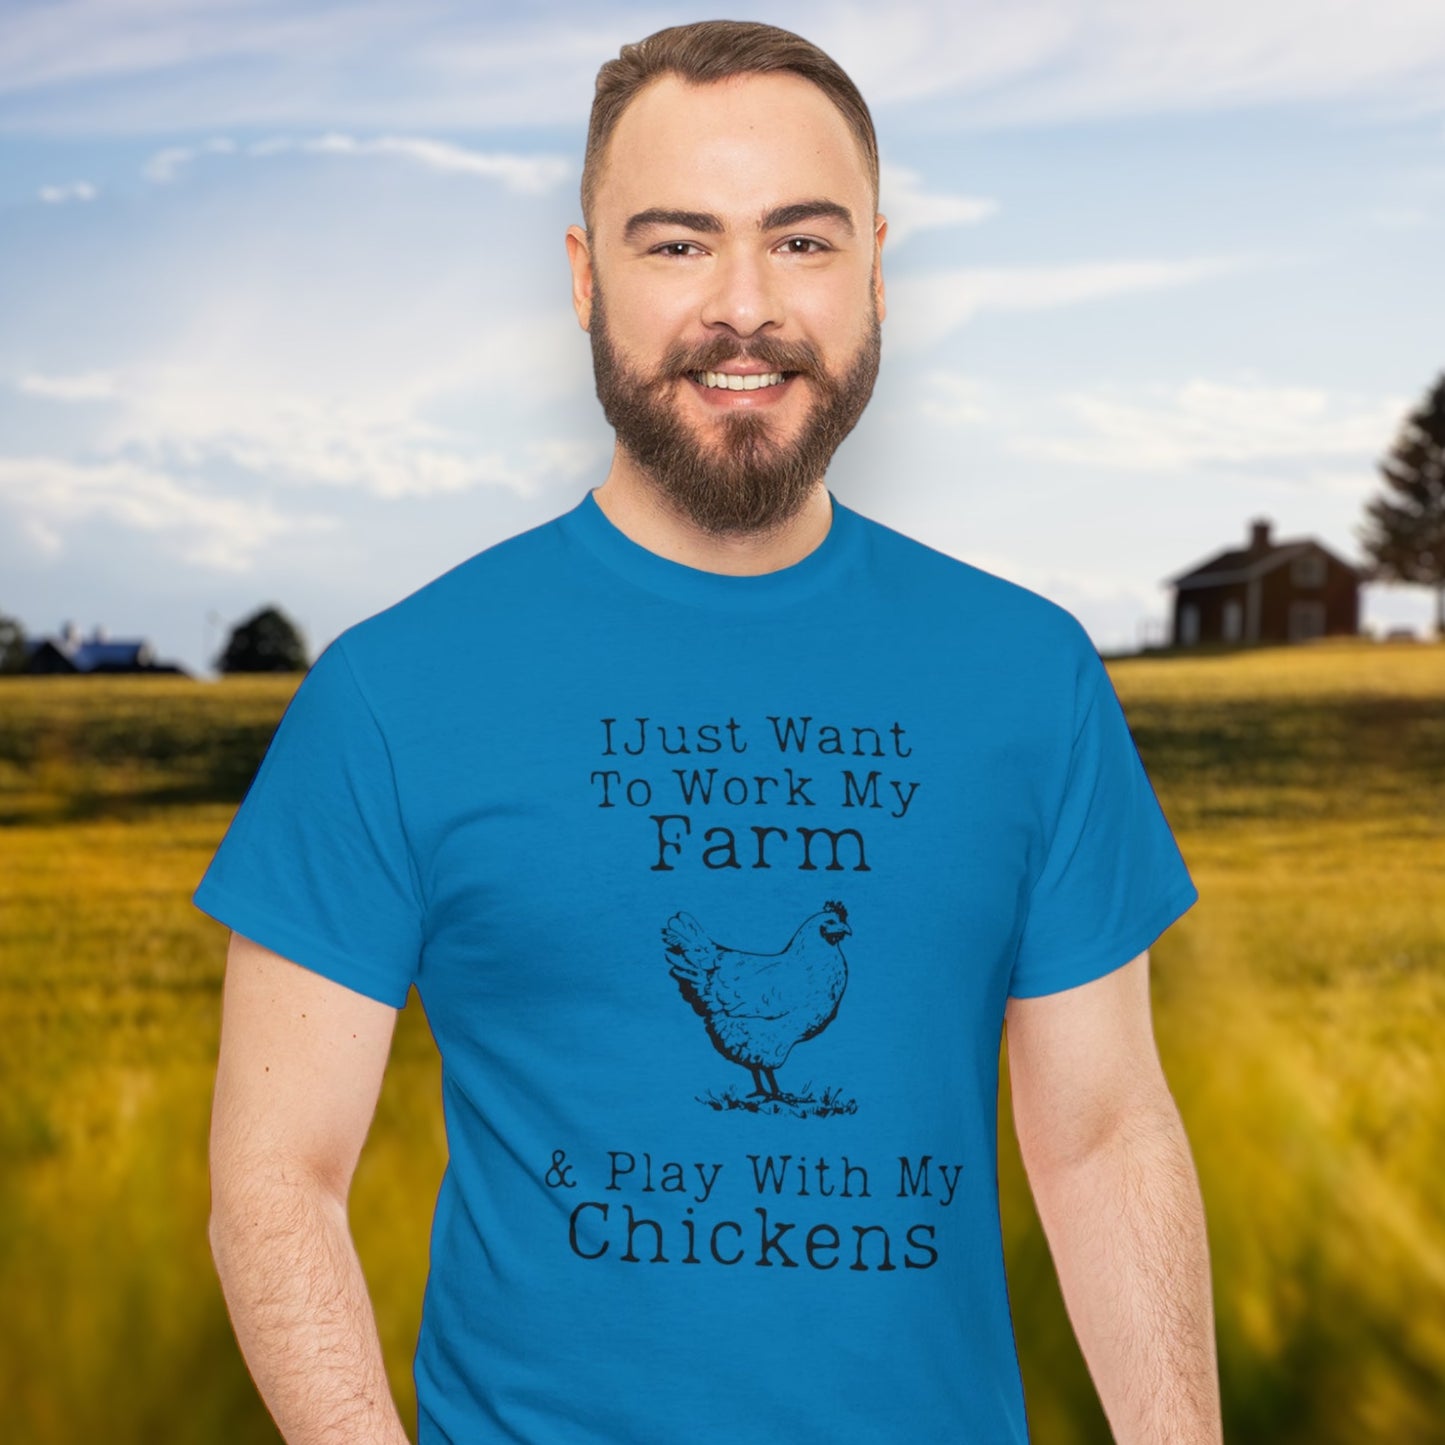 "Farm & Chickens" T-Shirt - Weave Got Gifts - Unique Gifts You Won’t Find Anywhere Else!